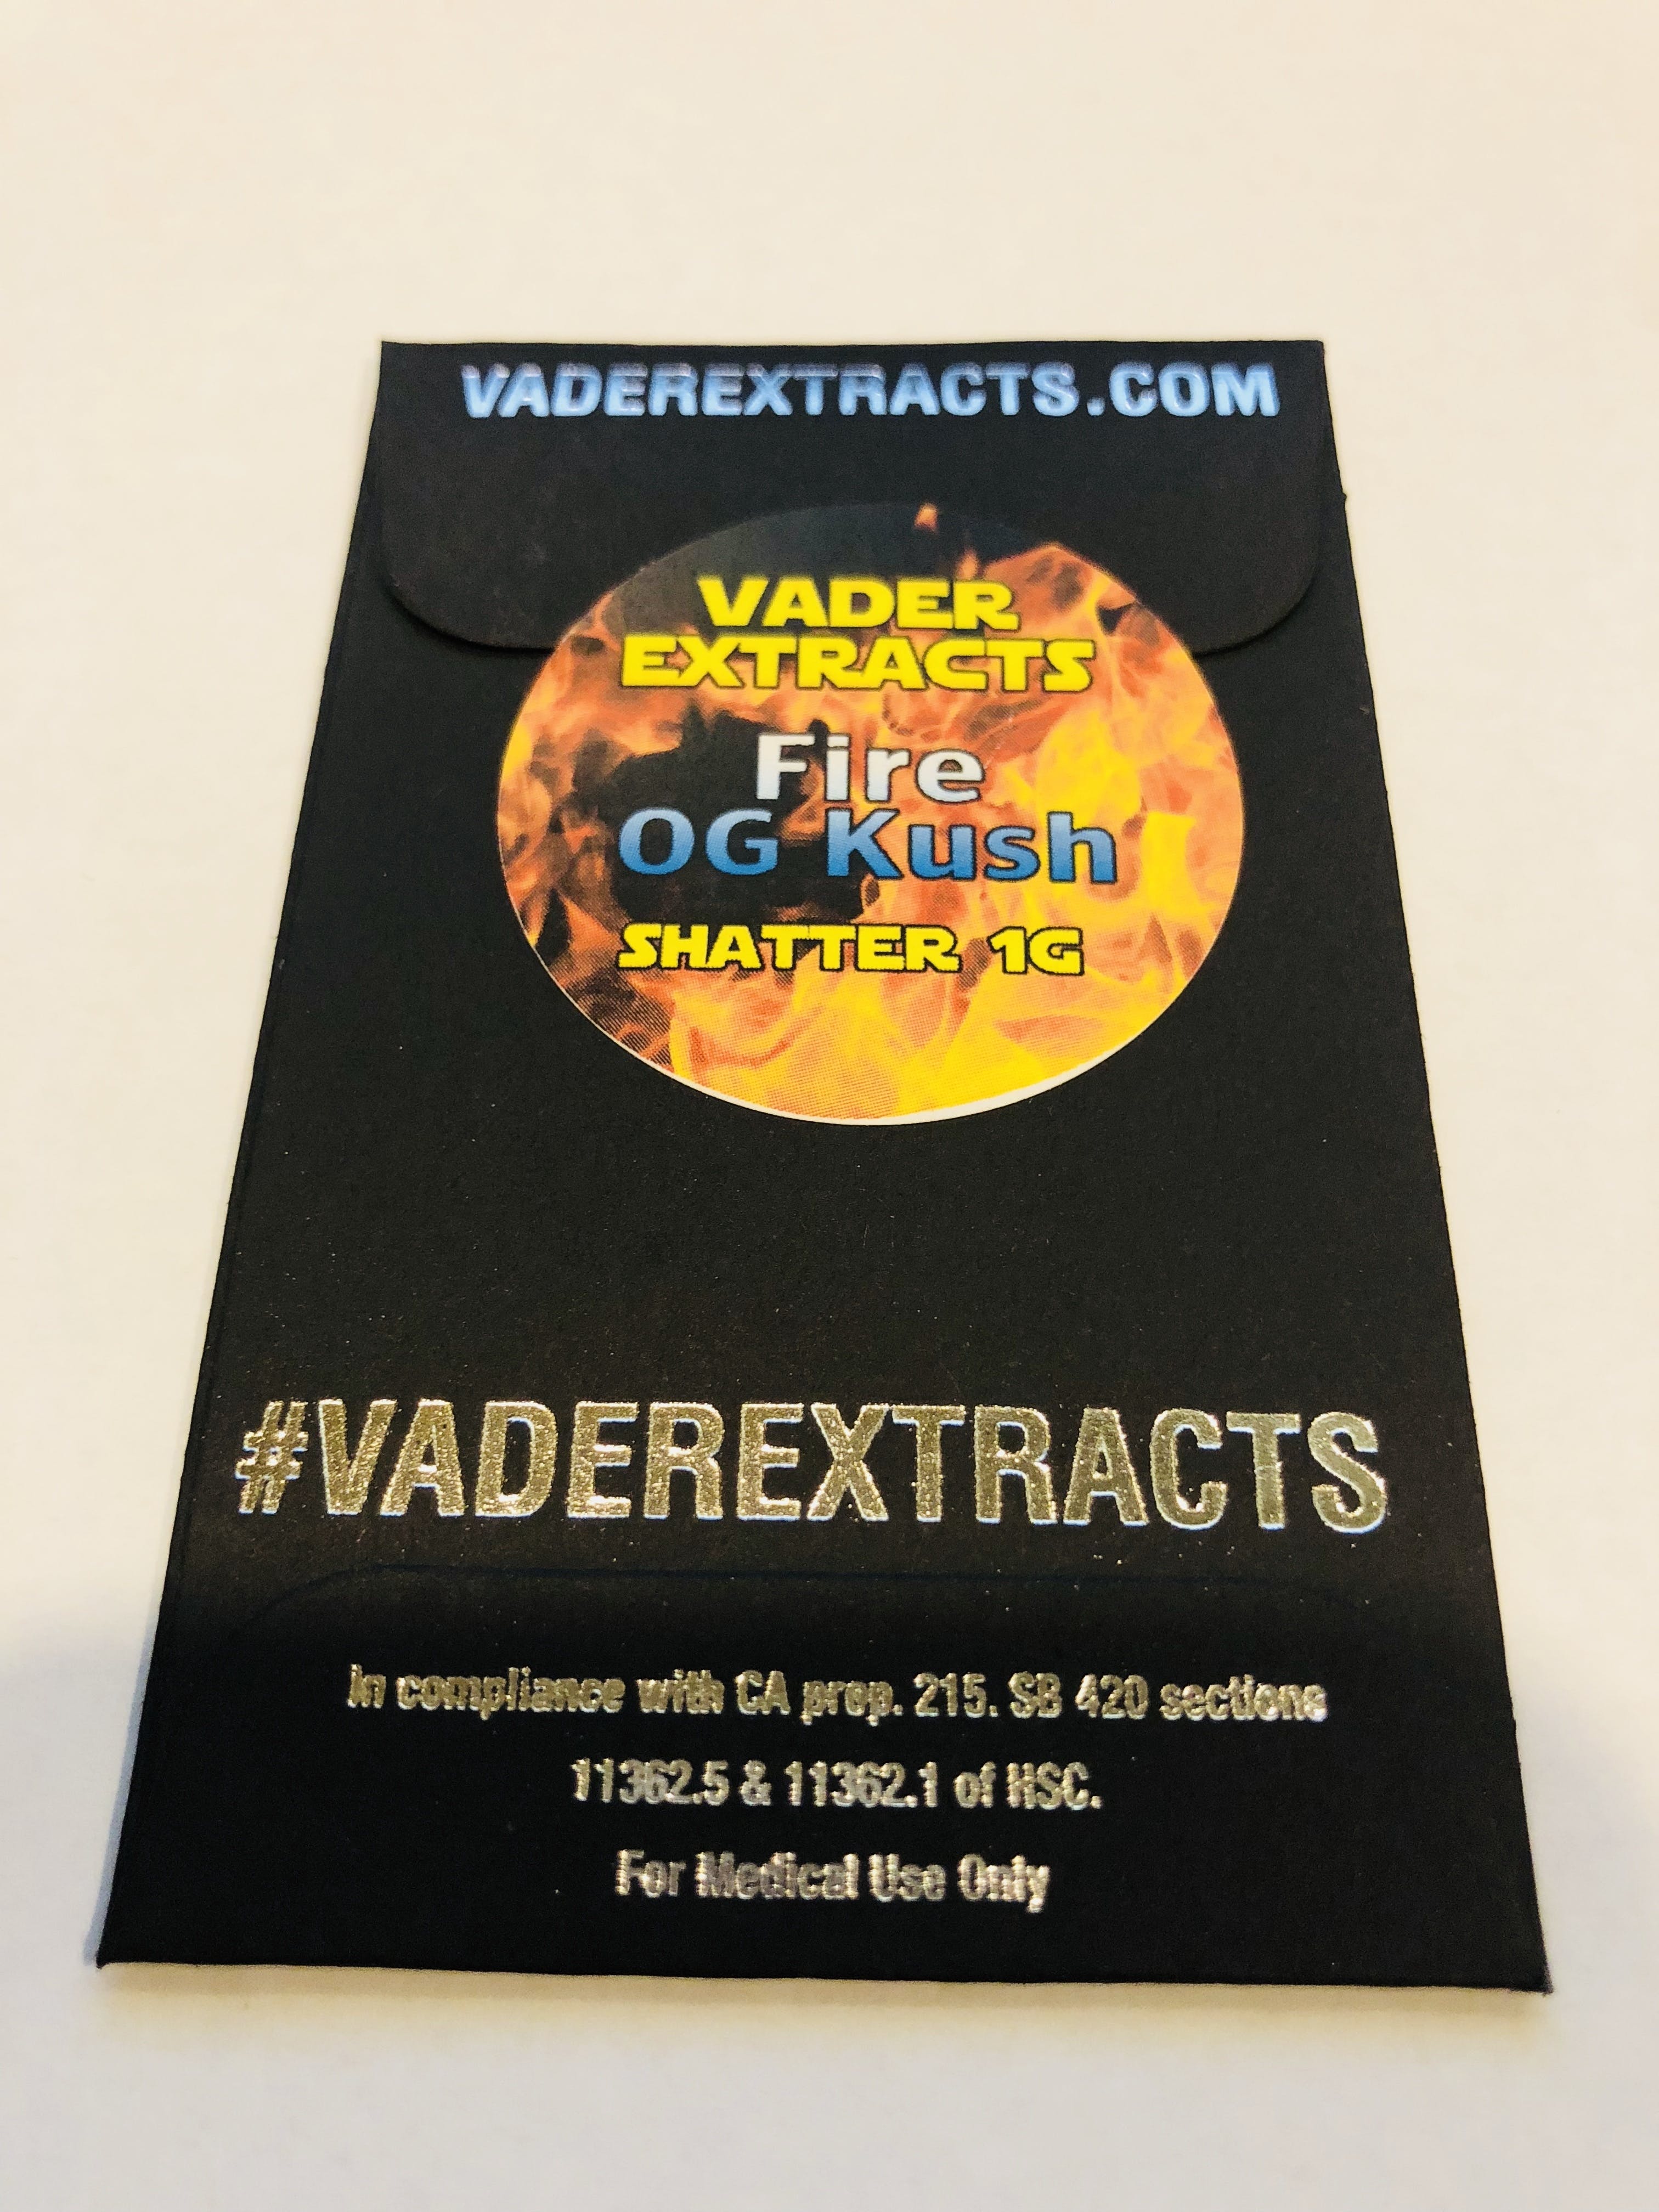 wax-vader-extracts-trim-runar-fire-og-kush